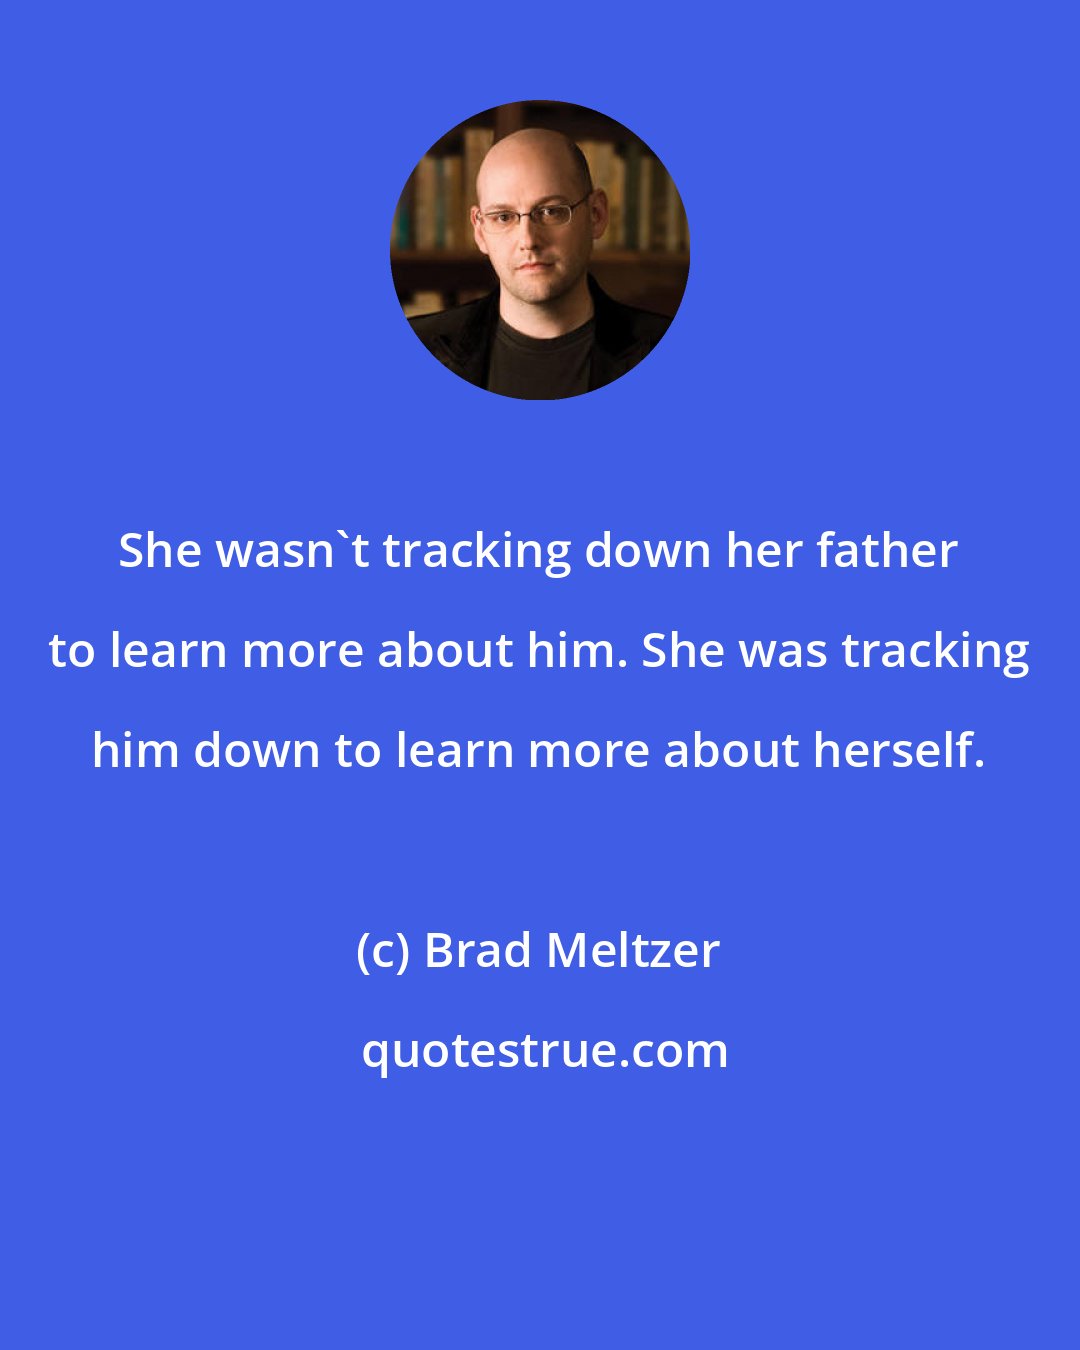 Brad Meltzer: She wasn't tracking down her father to learn more about him. She was tracking him down to learn more about herself.